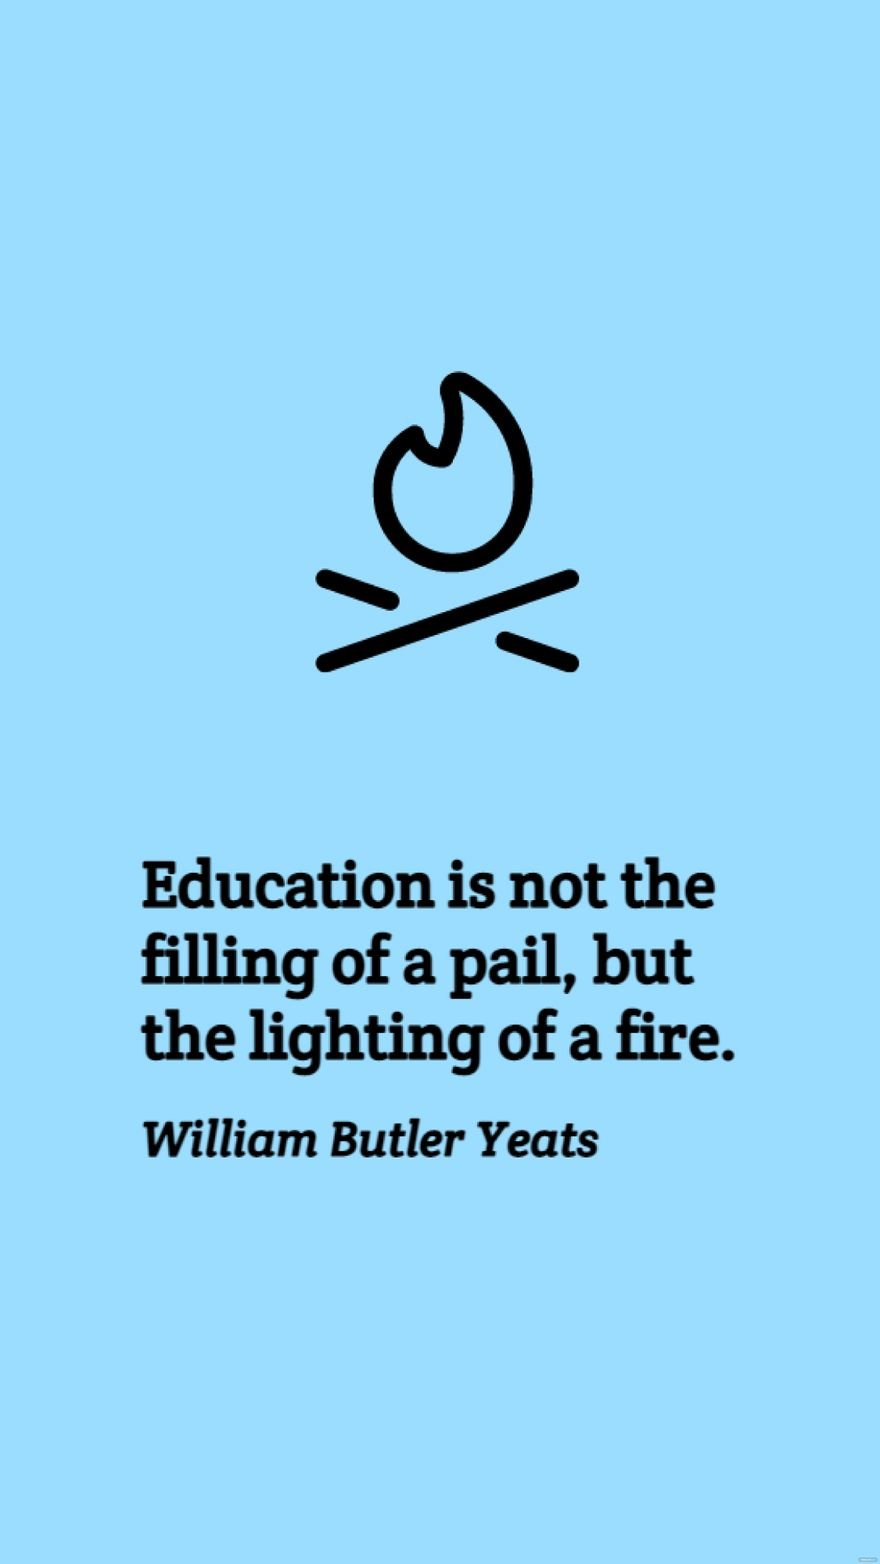 William Butler Yeats - Education is not the filling of a pail, but the lighting of a fire.